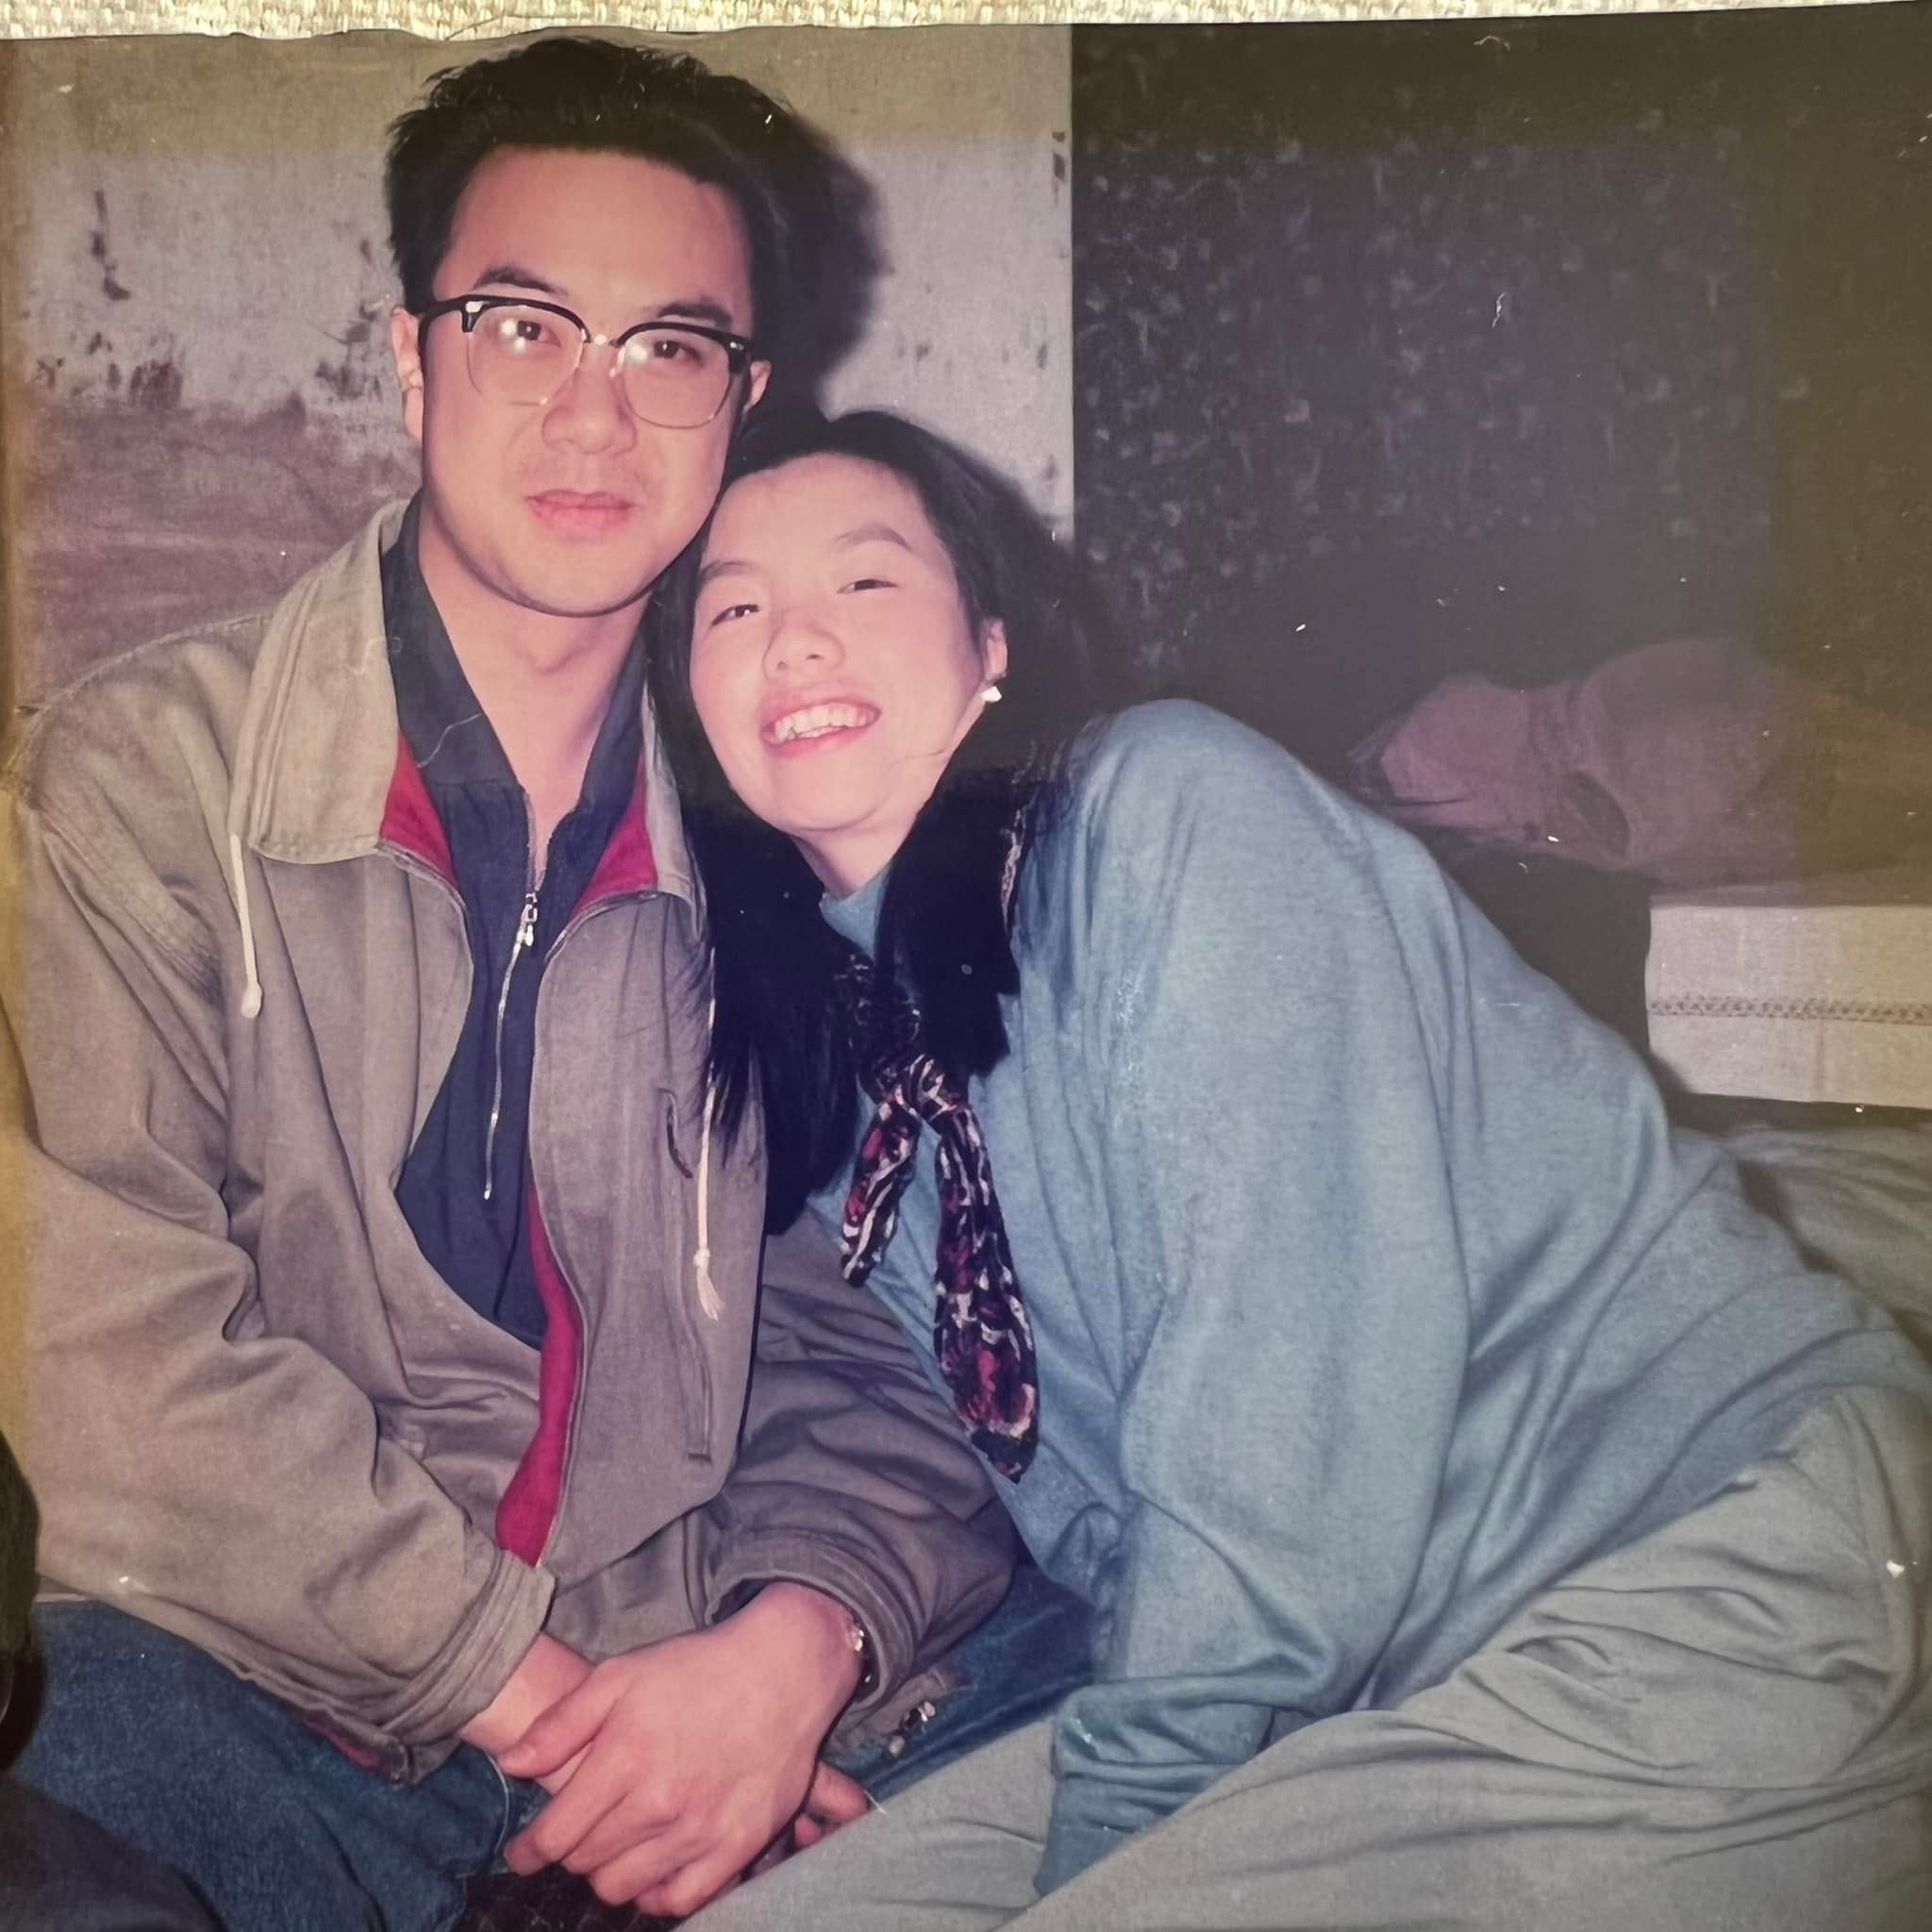 Young Gordon and Angela Fong aged about 26